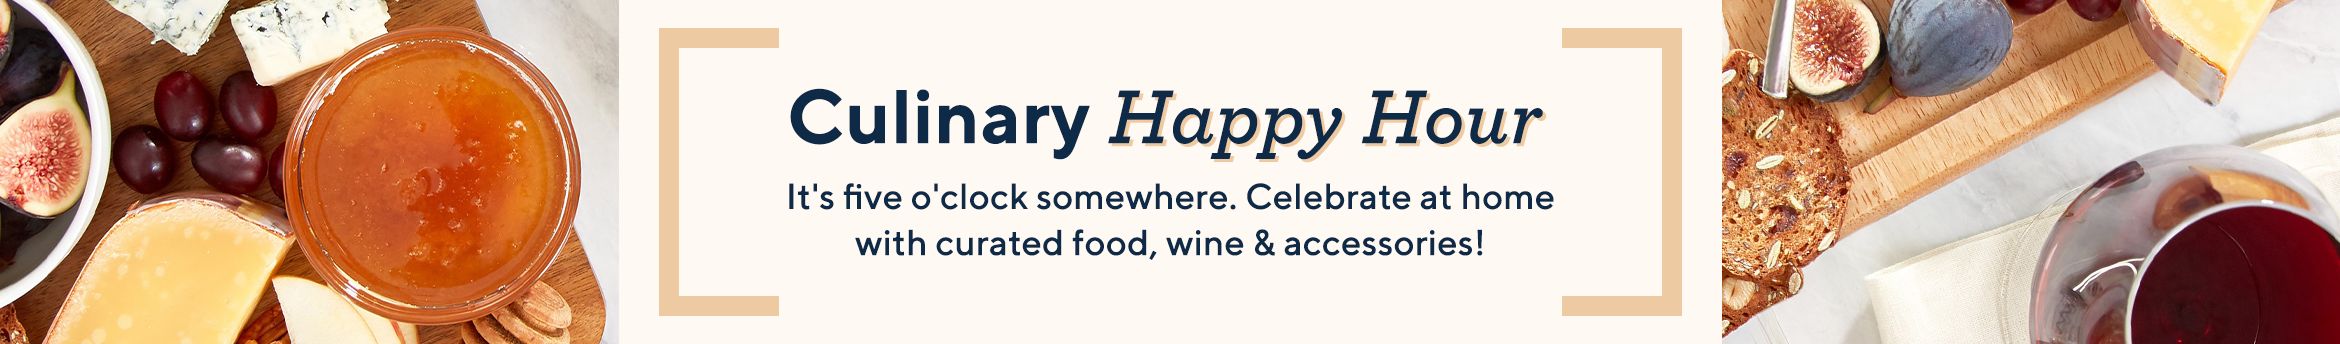 Culinary Happy Hour It's five o'clock somewhere. Celebrate at home with curated food, wine & accessories!